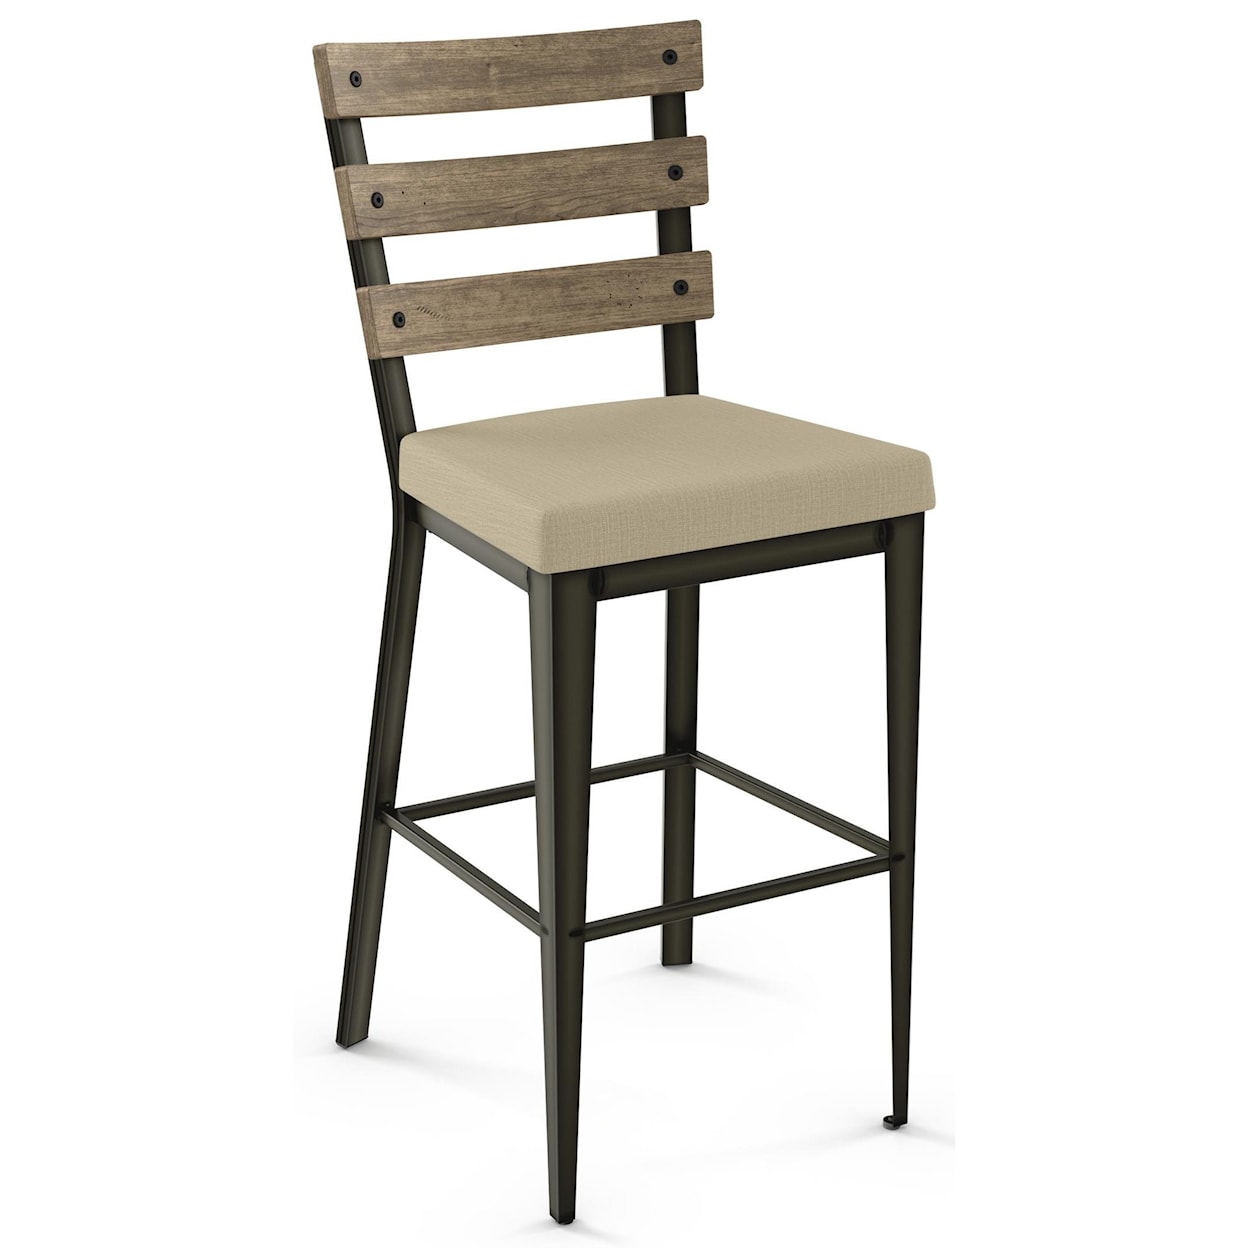 Amisco Industrial 26" Dexter Counter Stool w/ Upholstered Seat